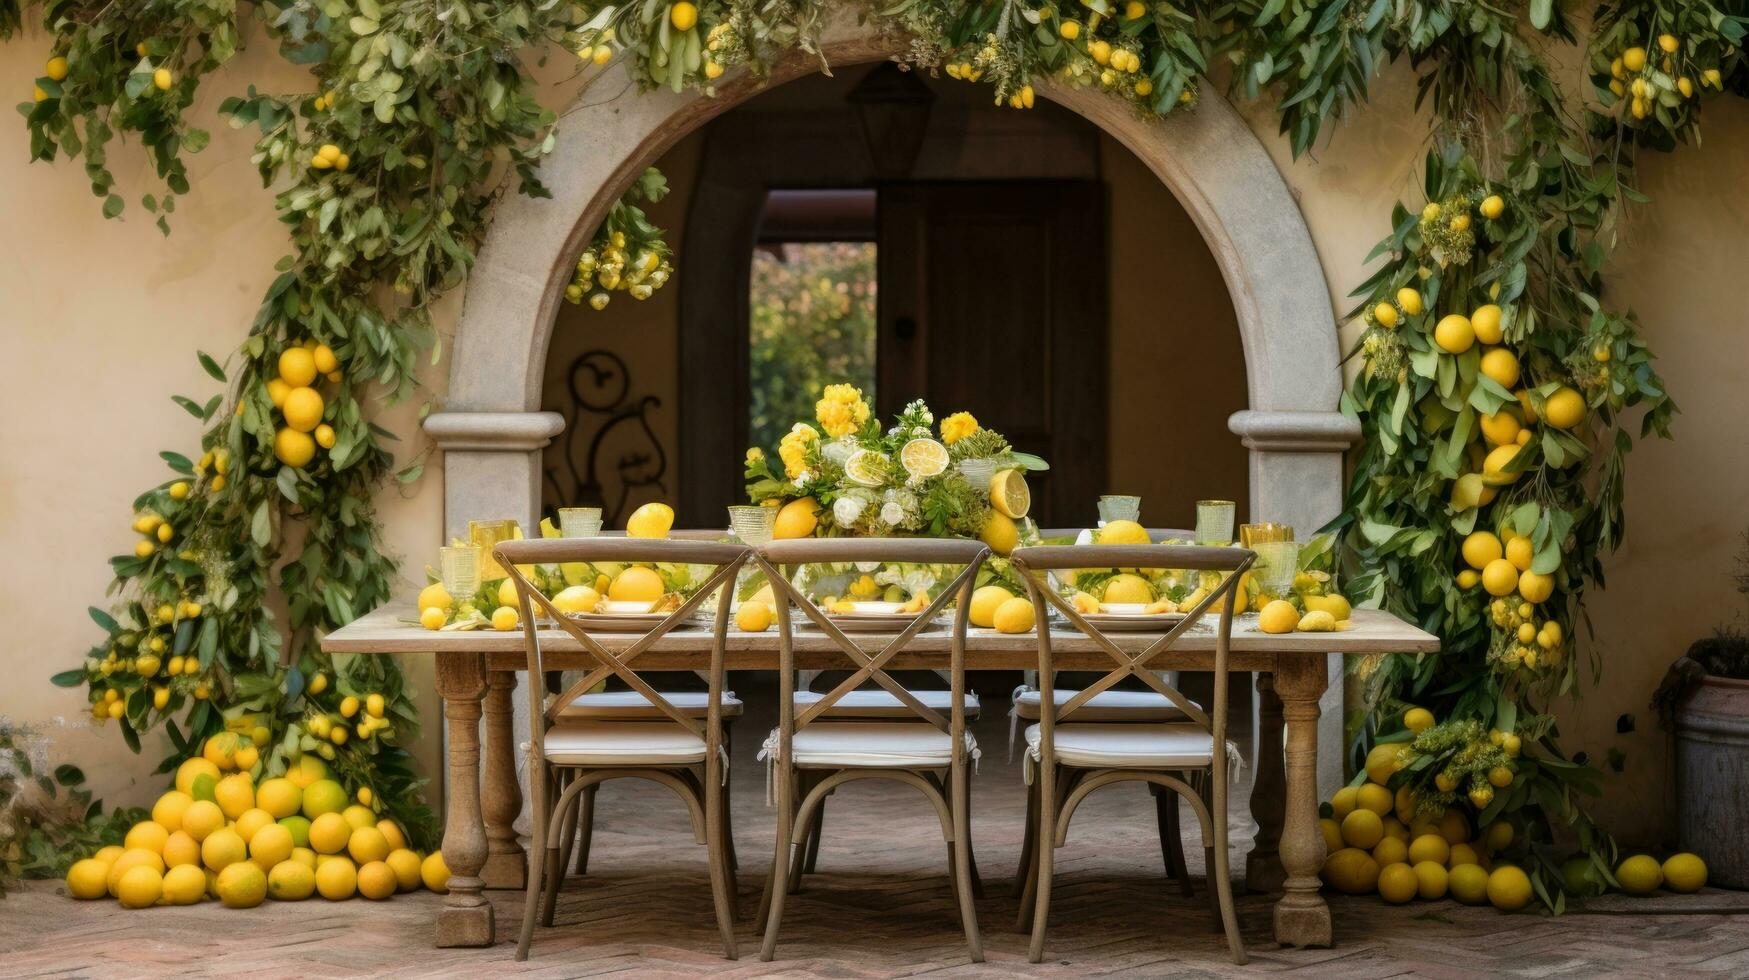 Table settings with lemons and greenery in the outdoor dining area photo